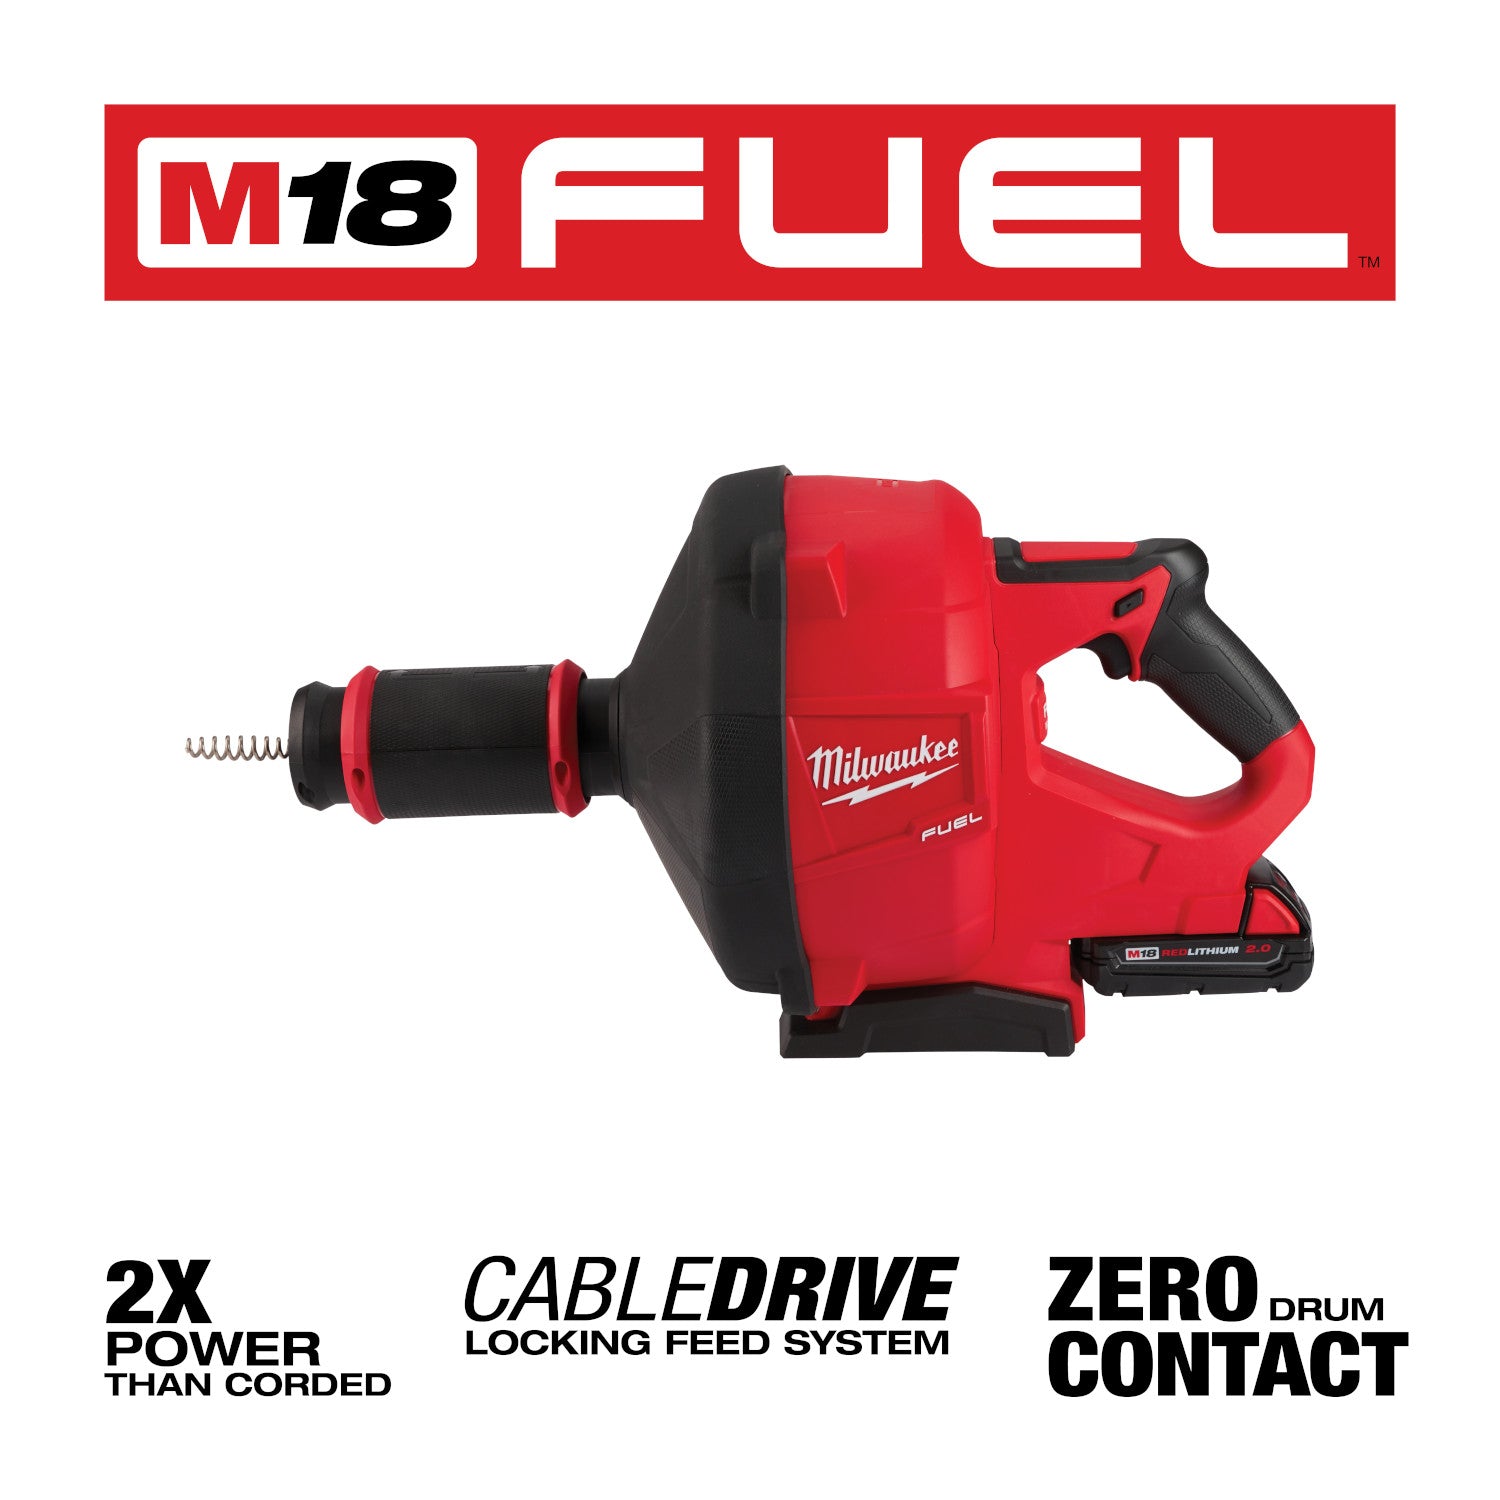 Milwaukee 2772A-21 - M18 FUEL™ Drain Snake w/ CABLE DRIVE™ with 5/16” Cable